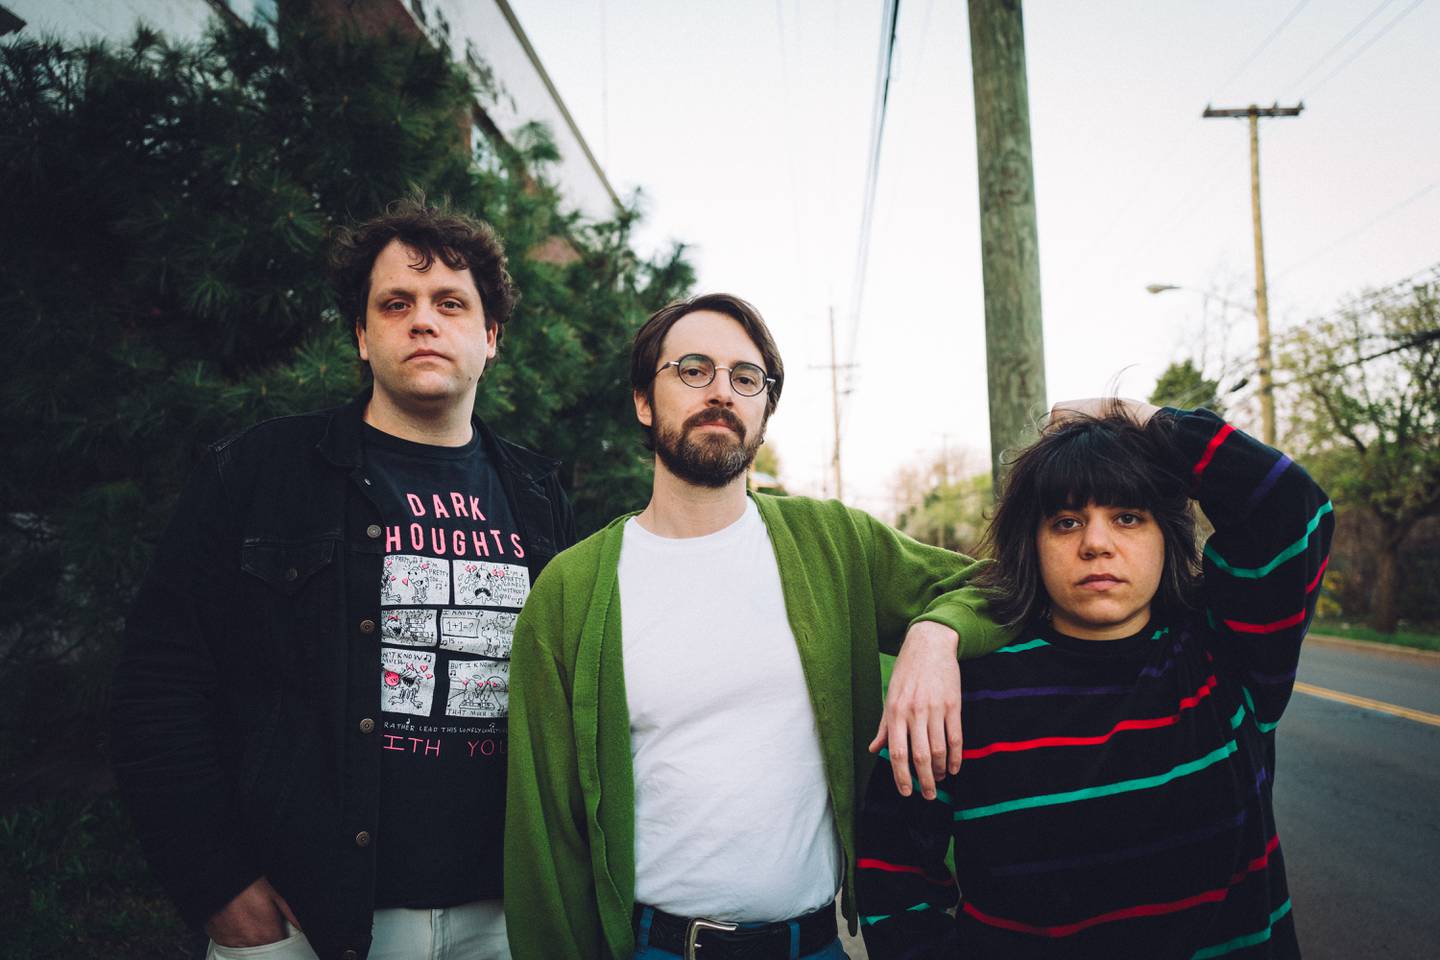 The Screaming Females are launching a weeklong tour of Alaska starting Saturday, March 4, 2023, in support of their new album "Desire Pathway"